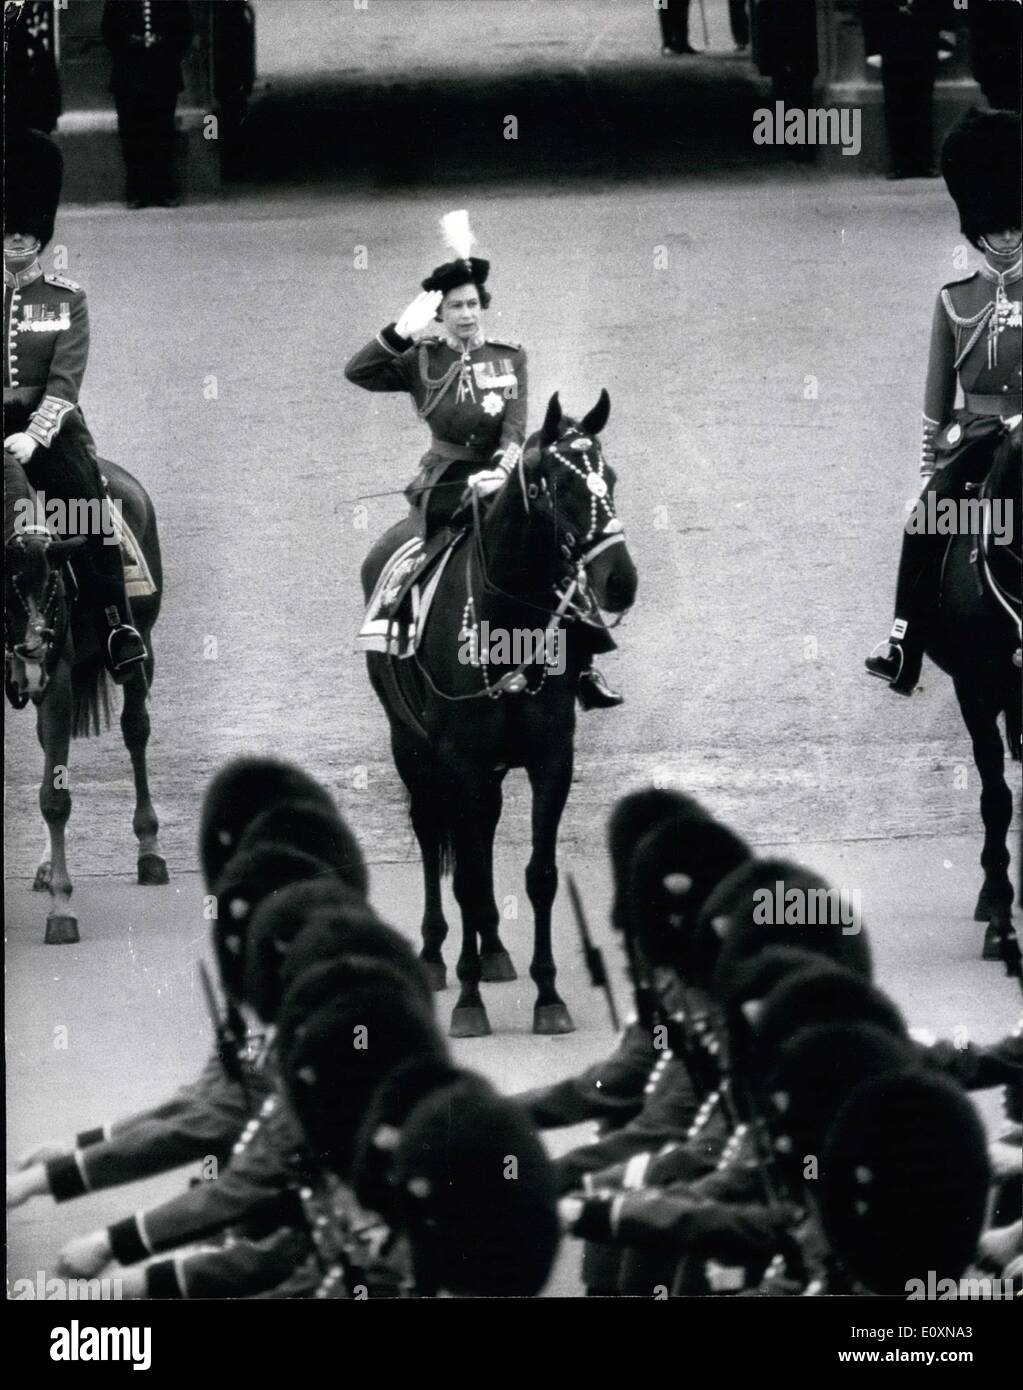 Jun. 06, 1967 - Trooping the colour ceremony: The ceremony of the Trooping of Colour took place this morning on Horse Guards Parade to celebrate the official Birthday of the Queen. The colour that was trooped was that of the 1st Batallion Grenadier Guards. Photo shows H.M. The Queen seen taking the salute from the gates of Buckingham Palace as the 1st Batallion Grenadier Guards march past. Stock Photo